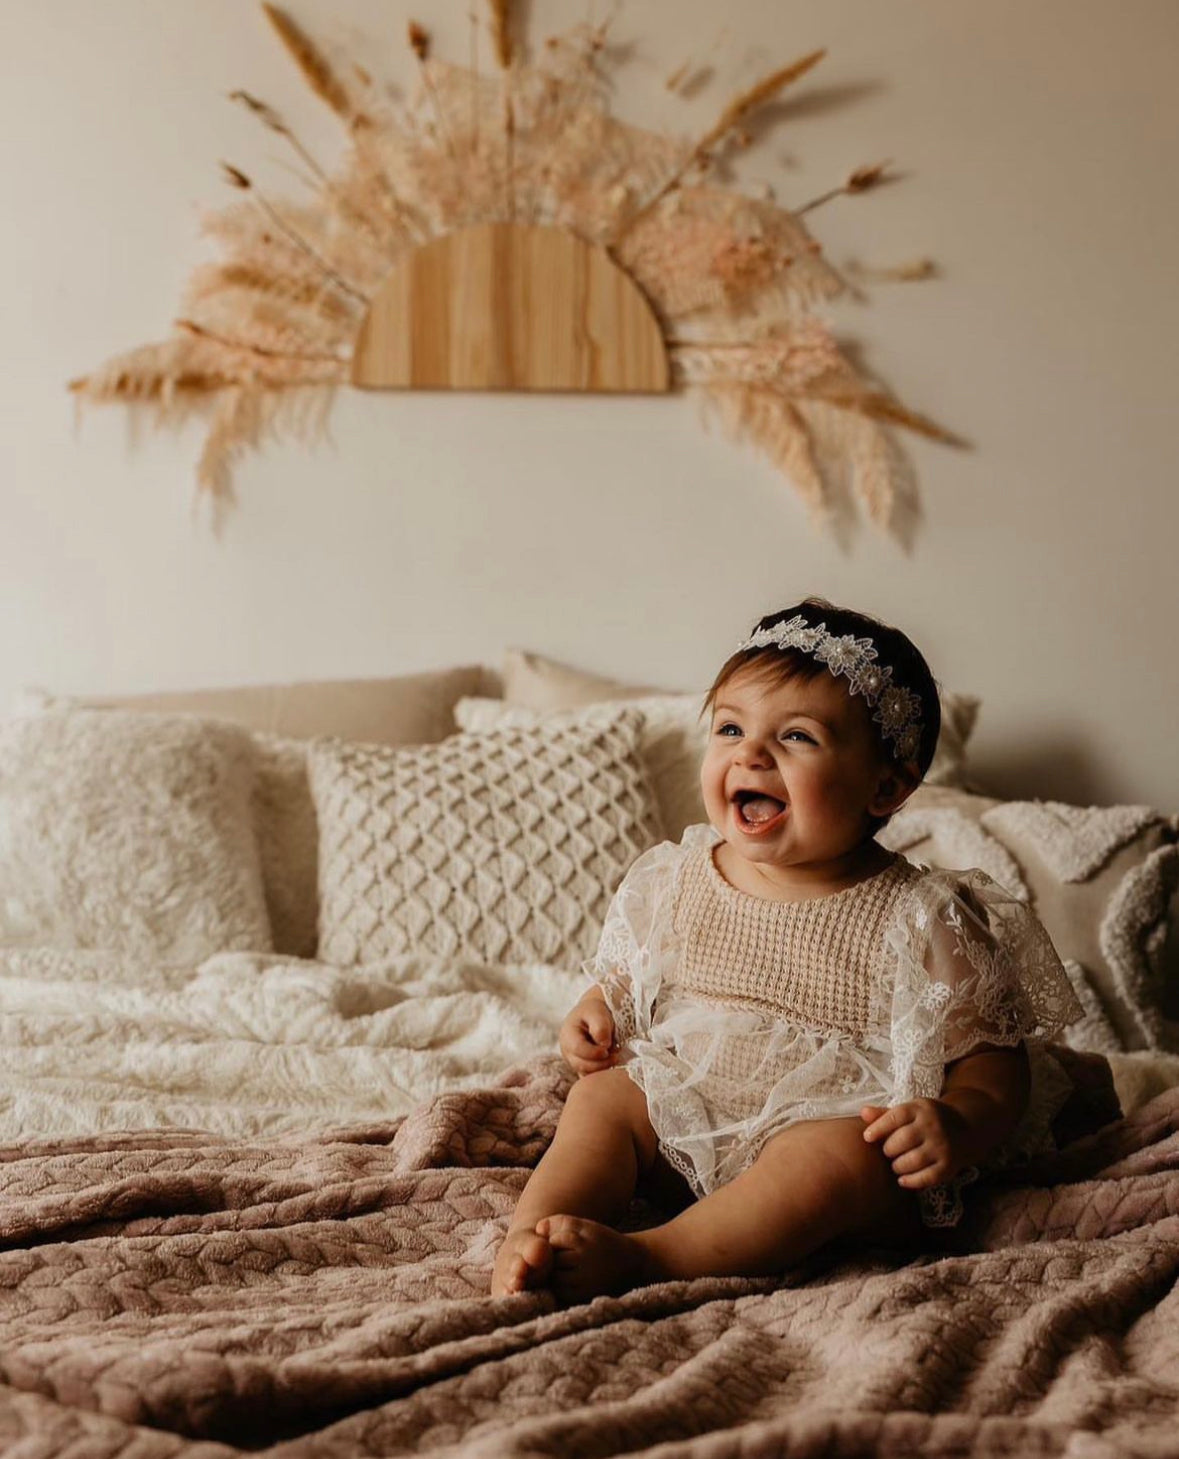 Dreamy Clothing For Your Littles ⋒⋒⋒ Over  4,000 5 Star Reviews!